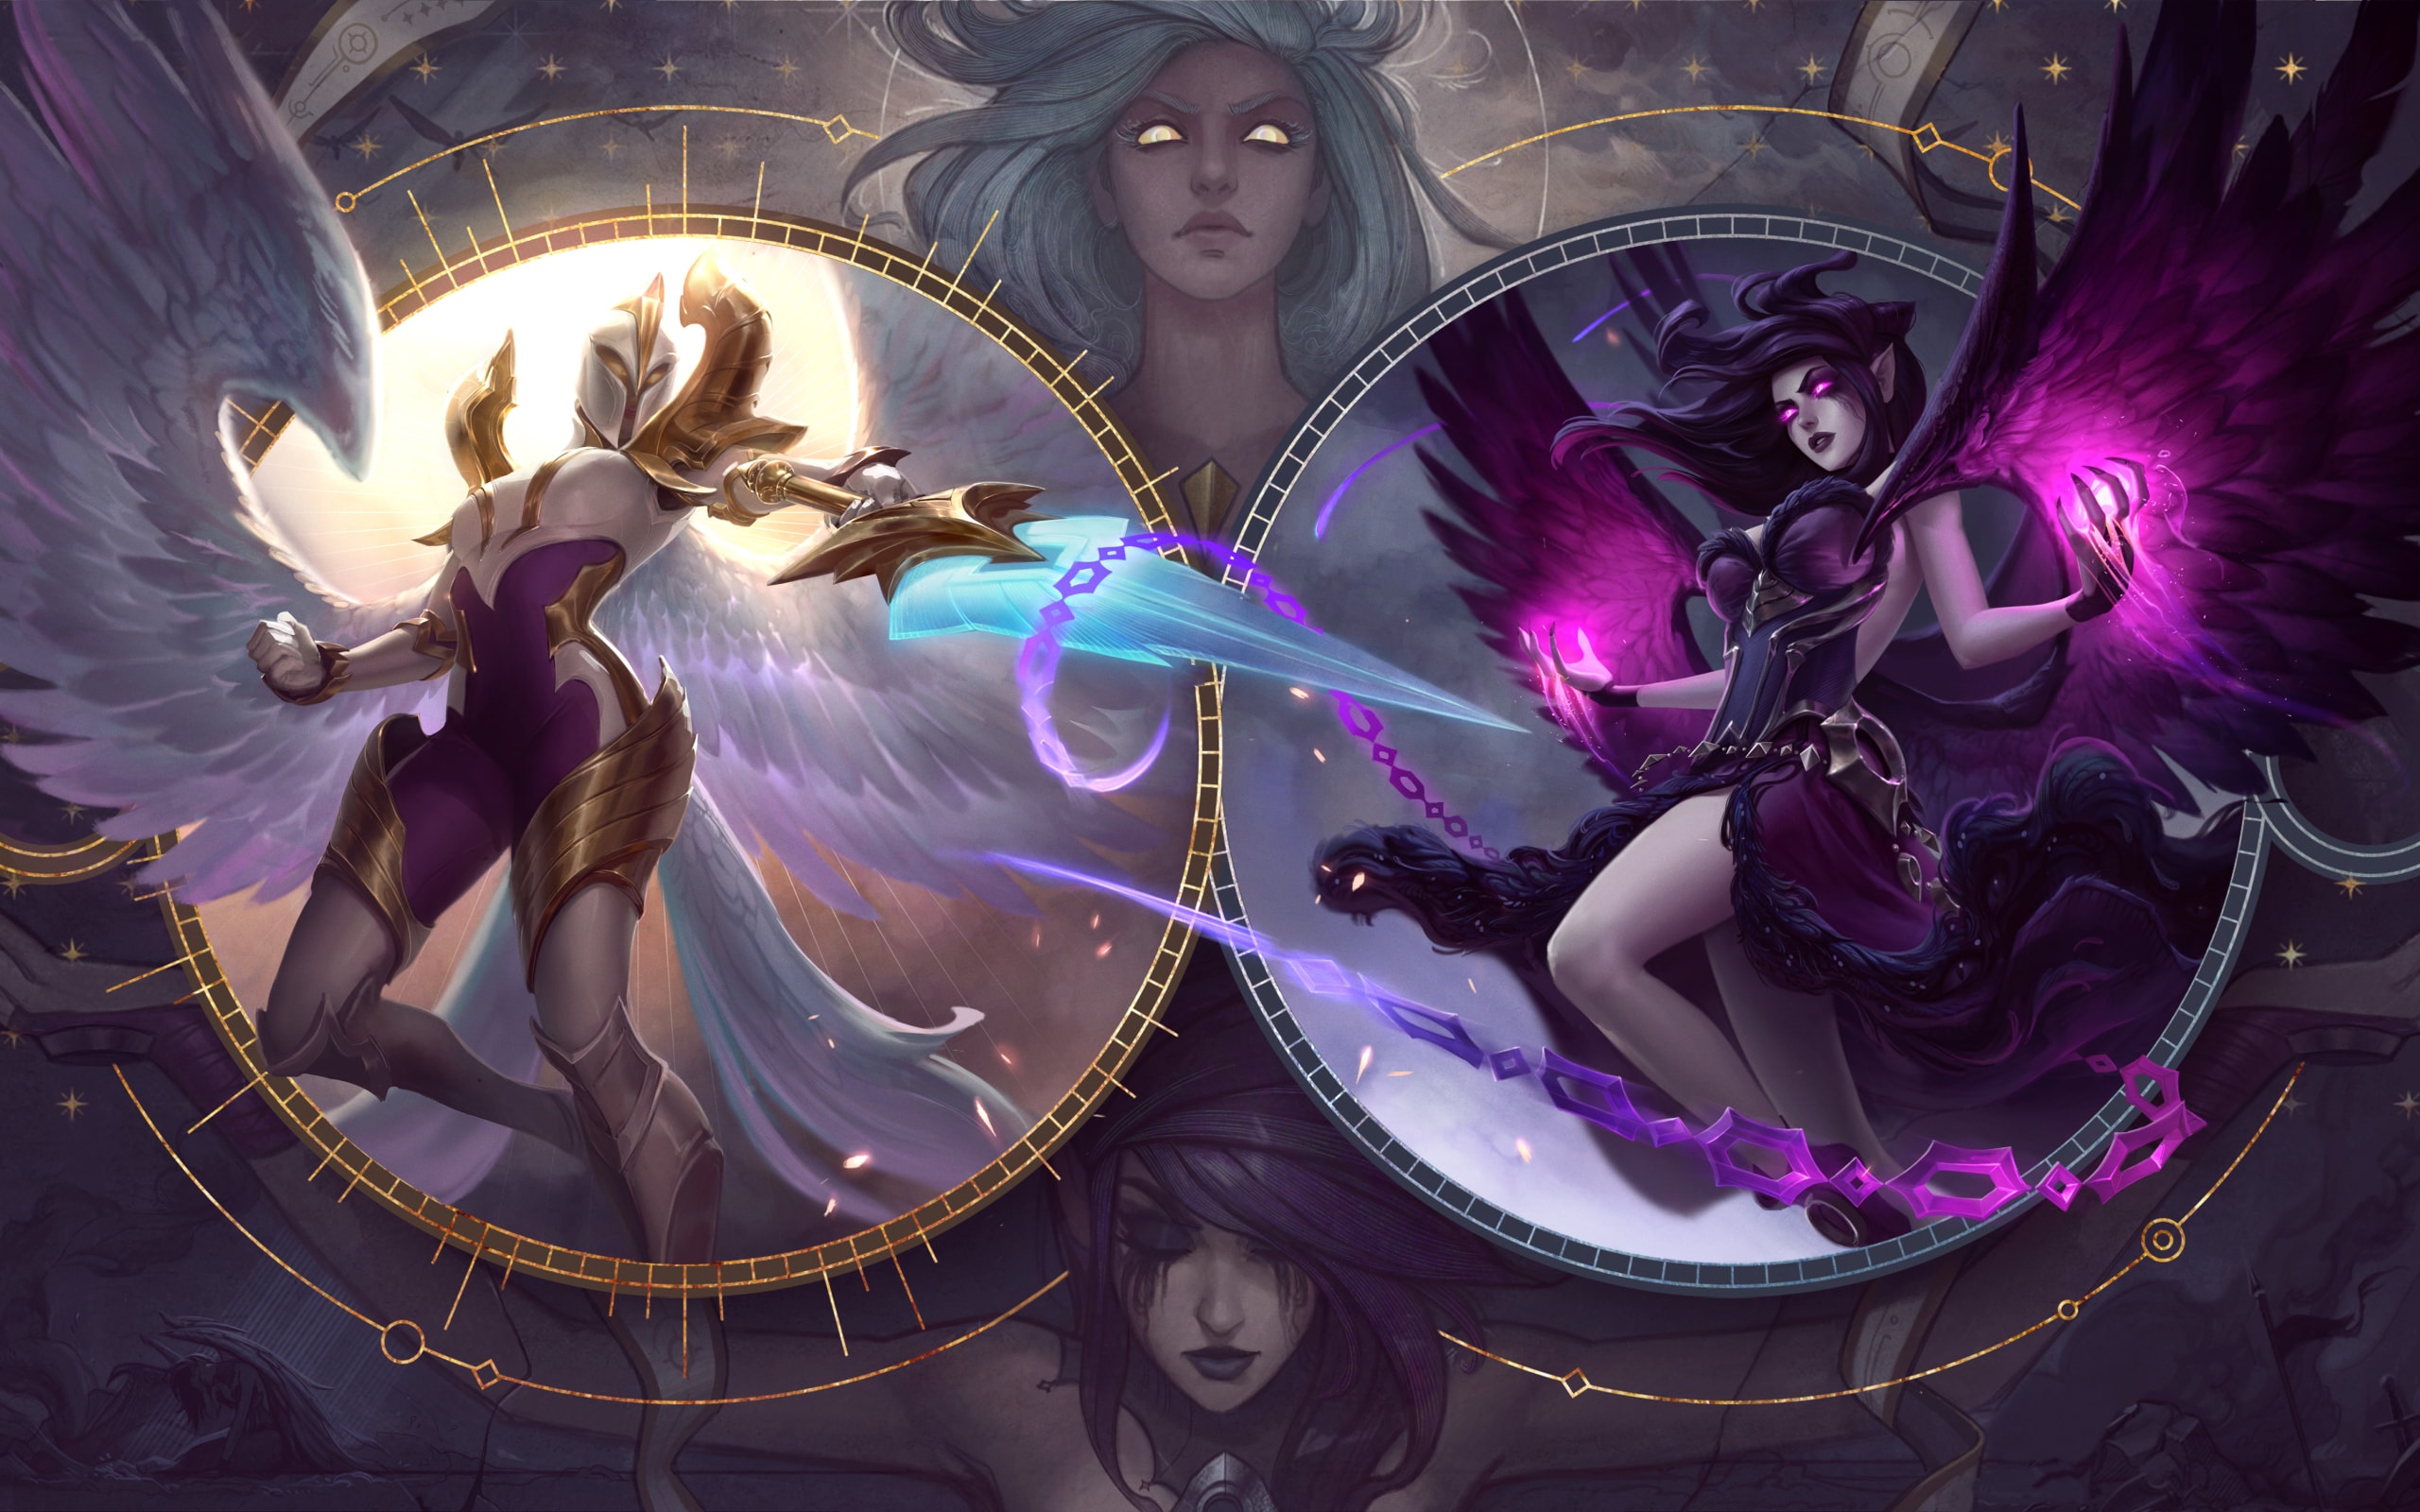 Wallpaper Of Kayle, League Of Legends, Morgana, Art, - League Of Legends Kayle And Morgana Rework , HD Wallpaper & Backgrounds